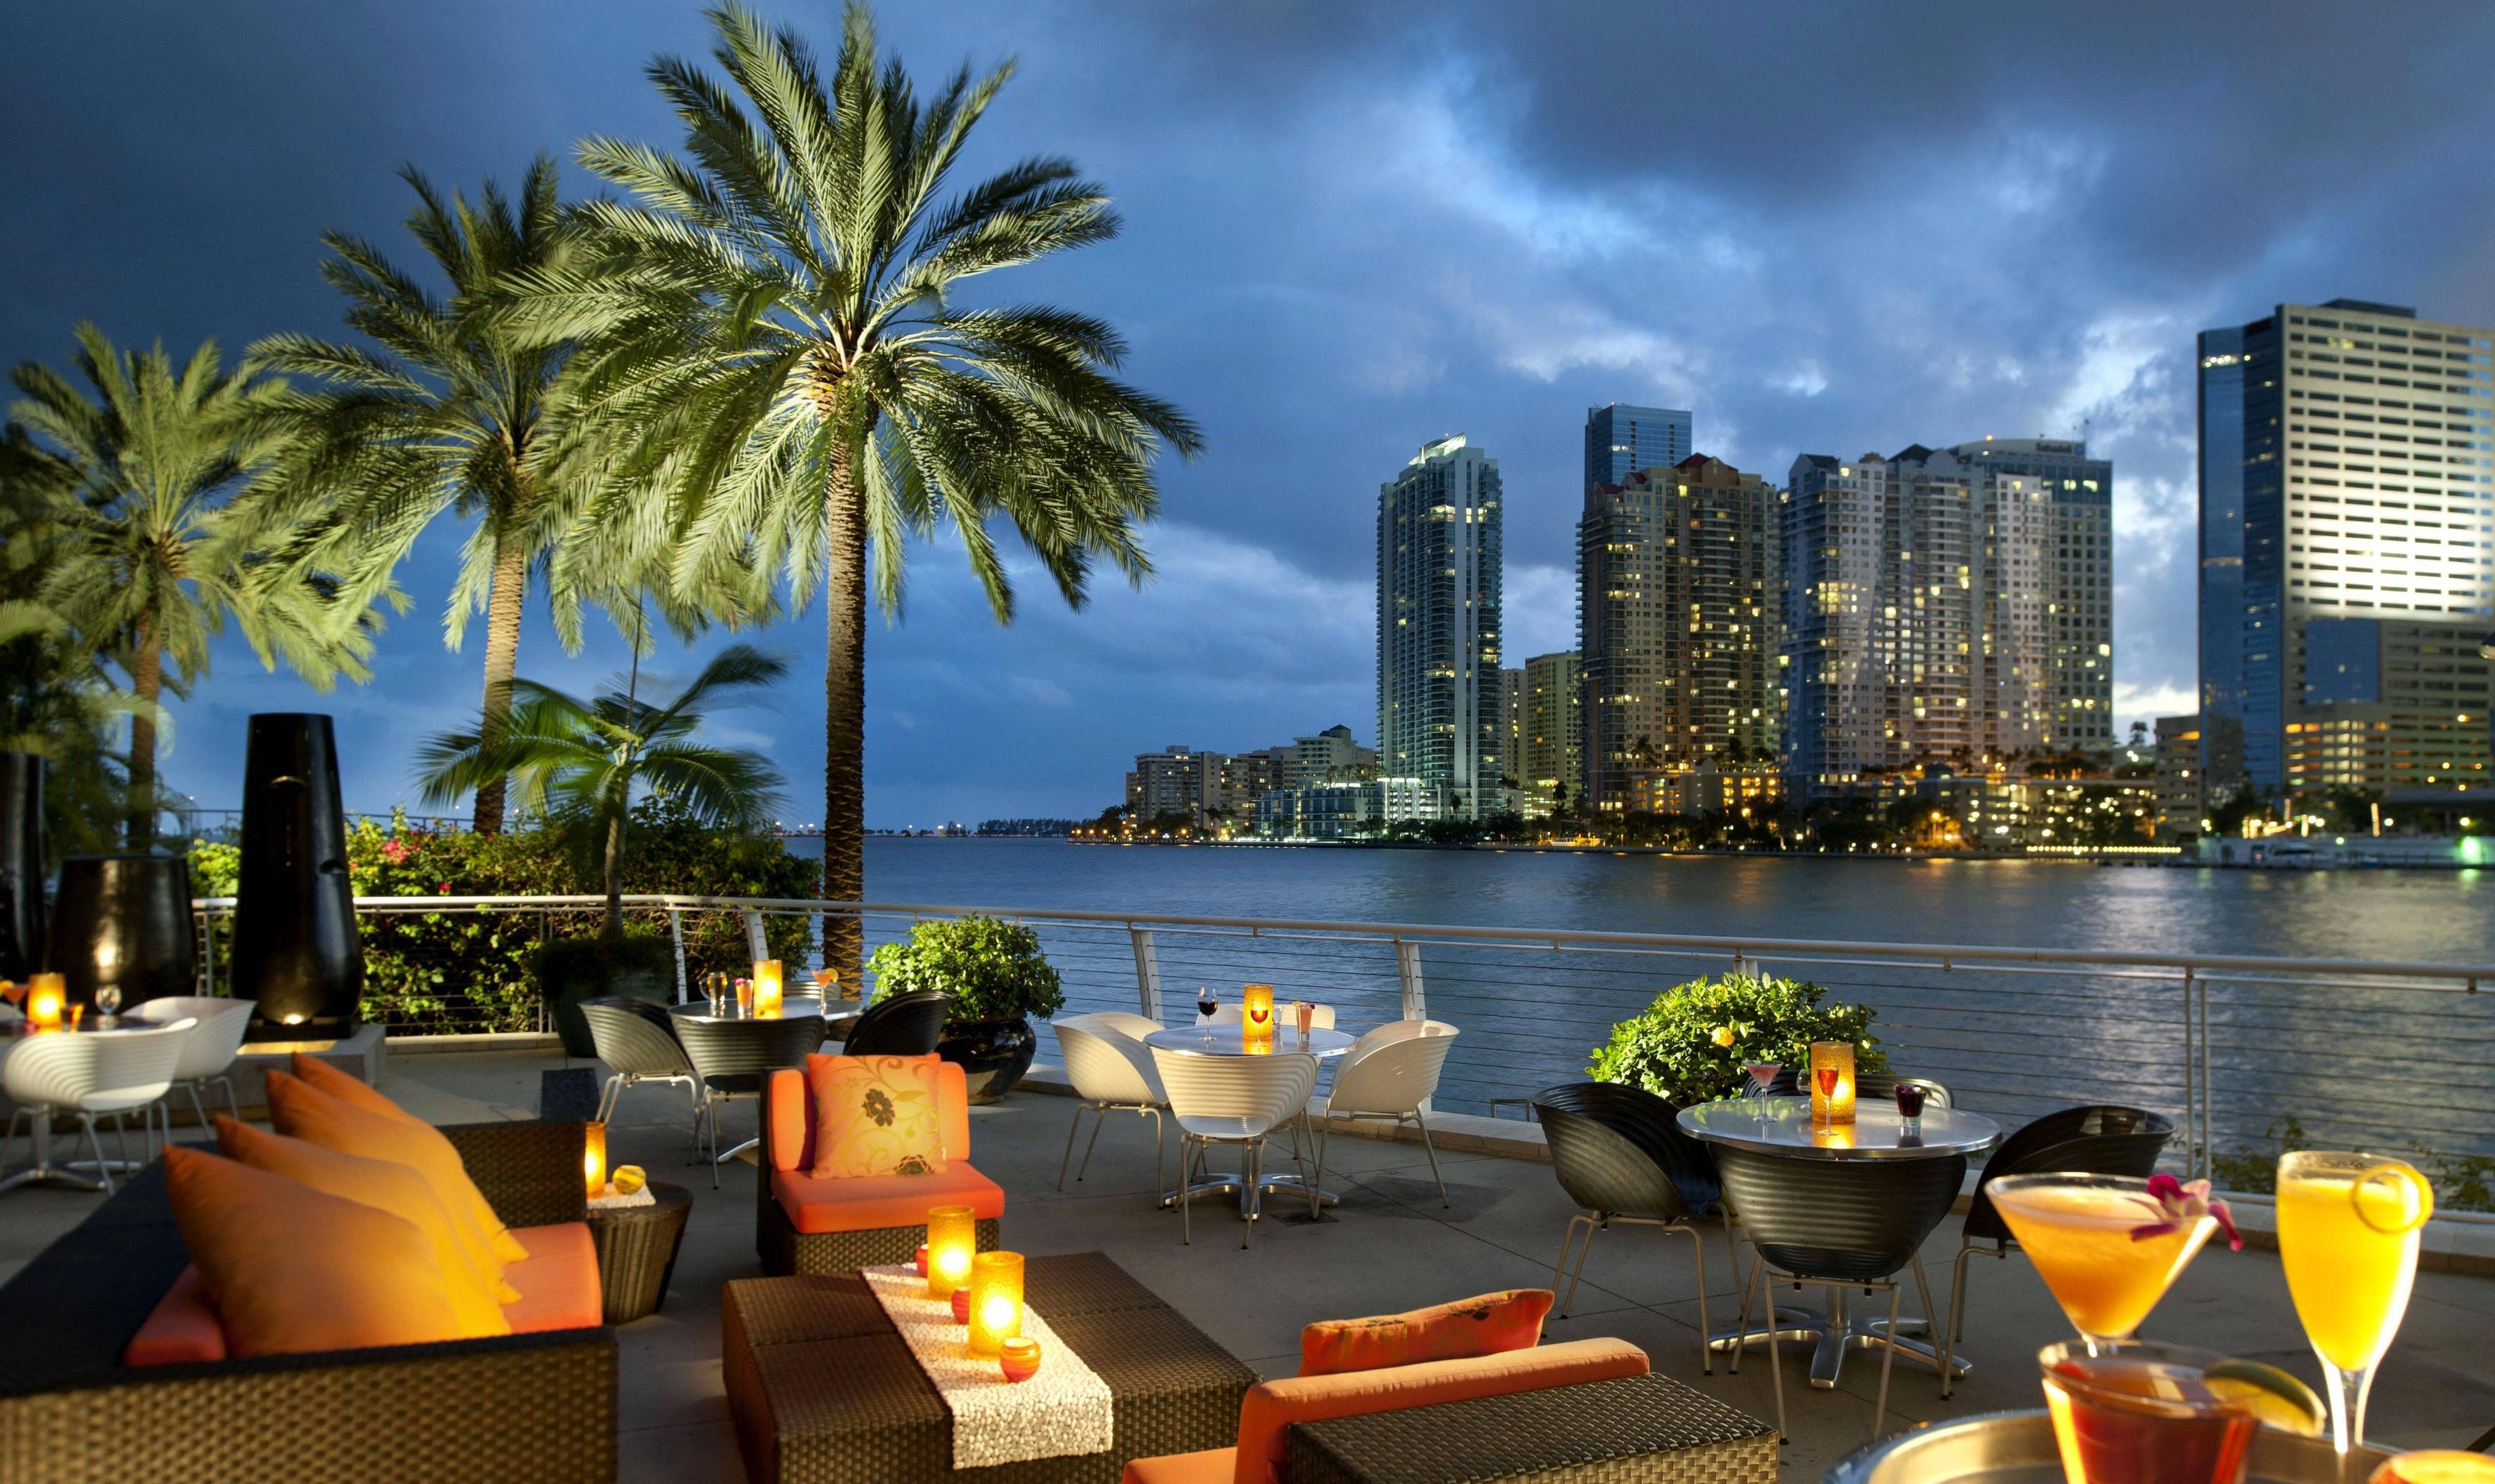 miami flight and hotel packages